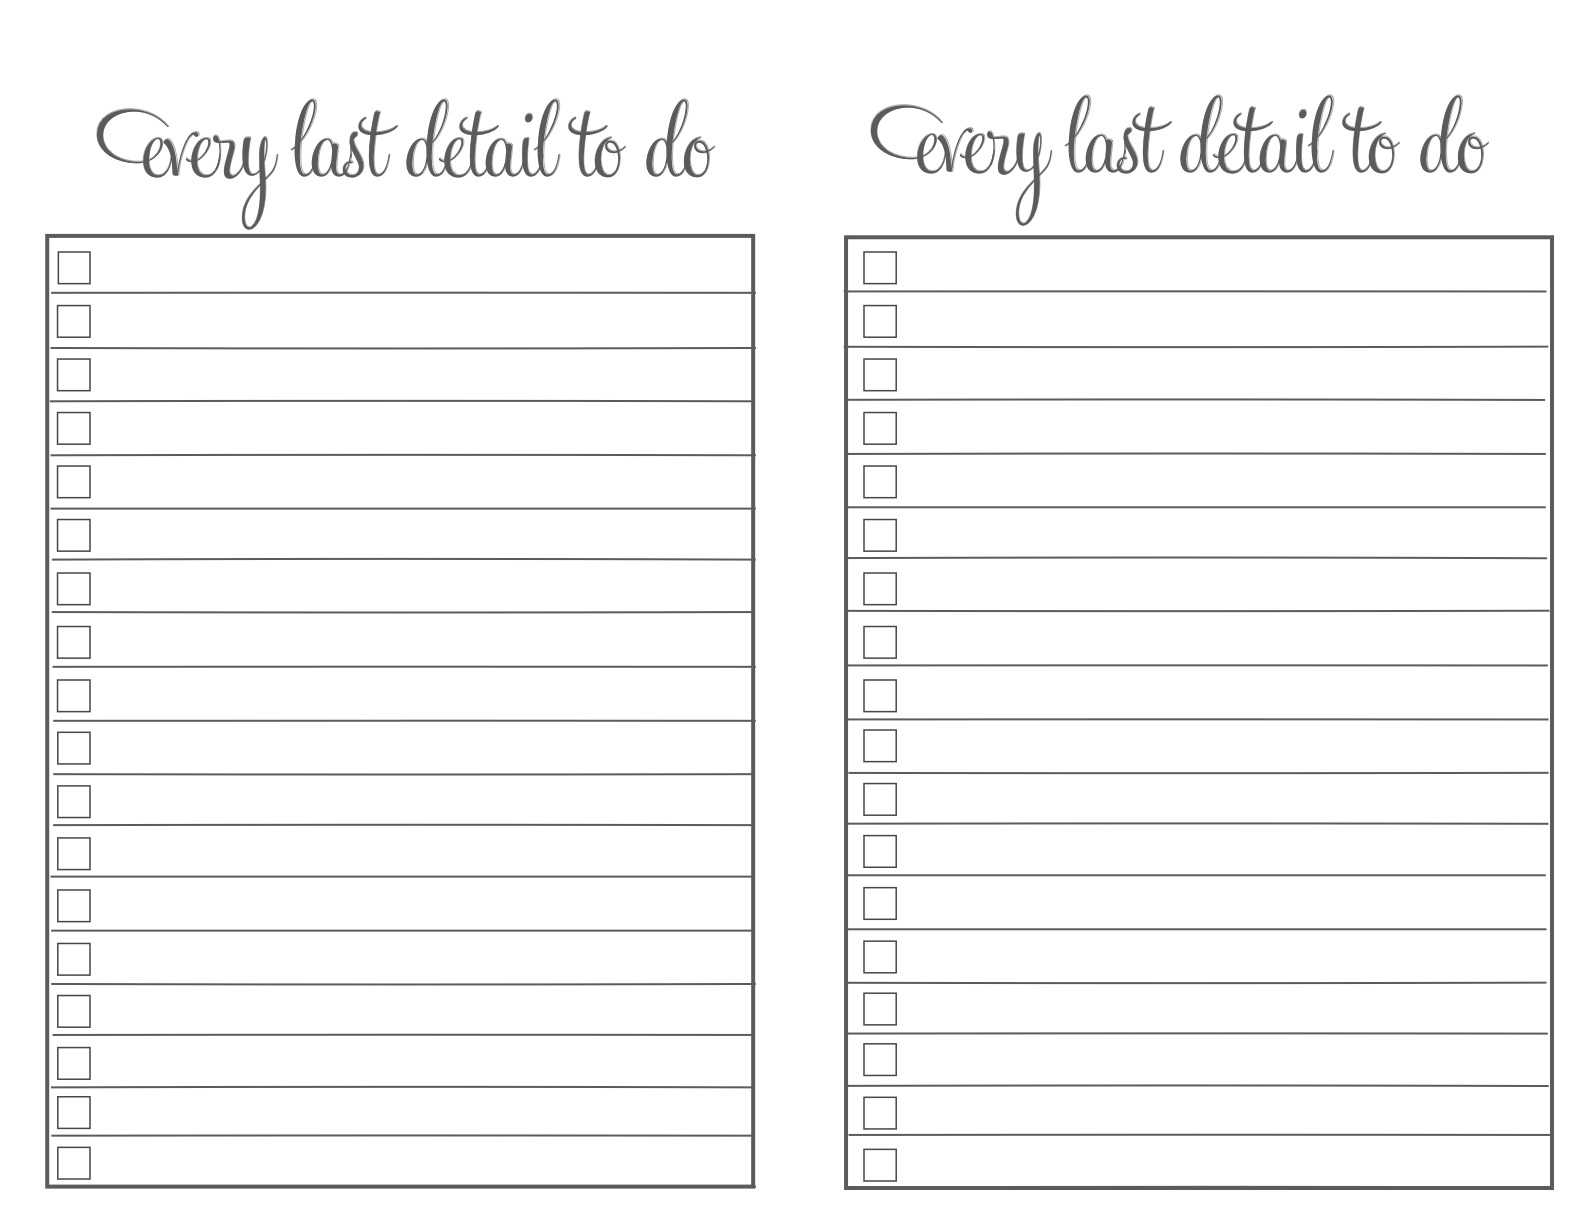 40 Printable To Do List Templates | Kittybabylove Throughout Blank To Do List Template